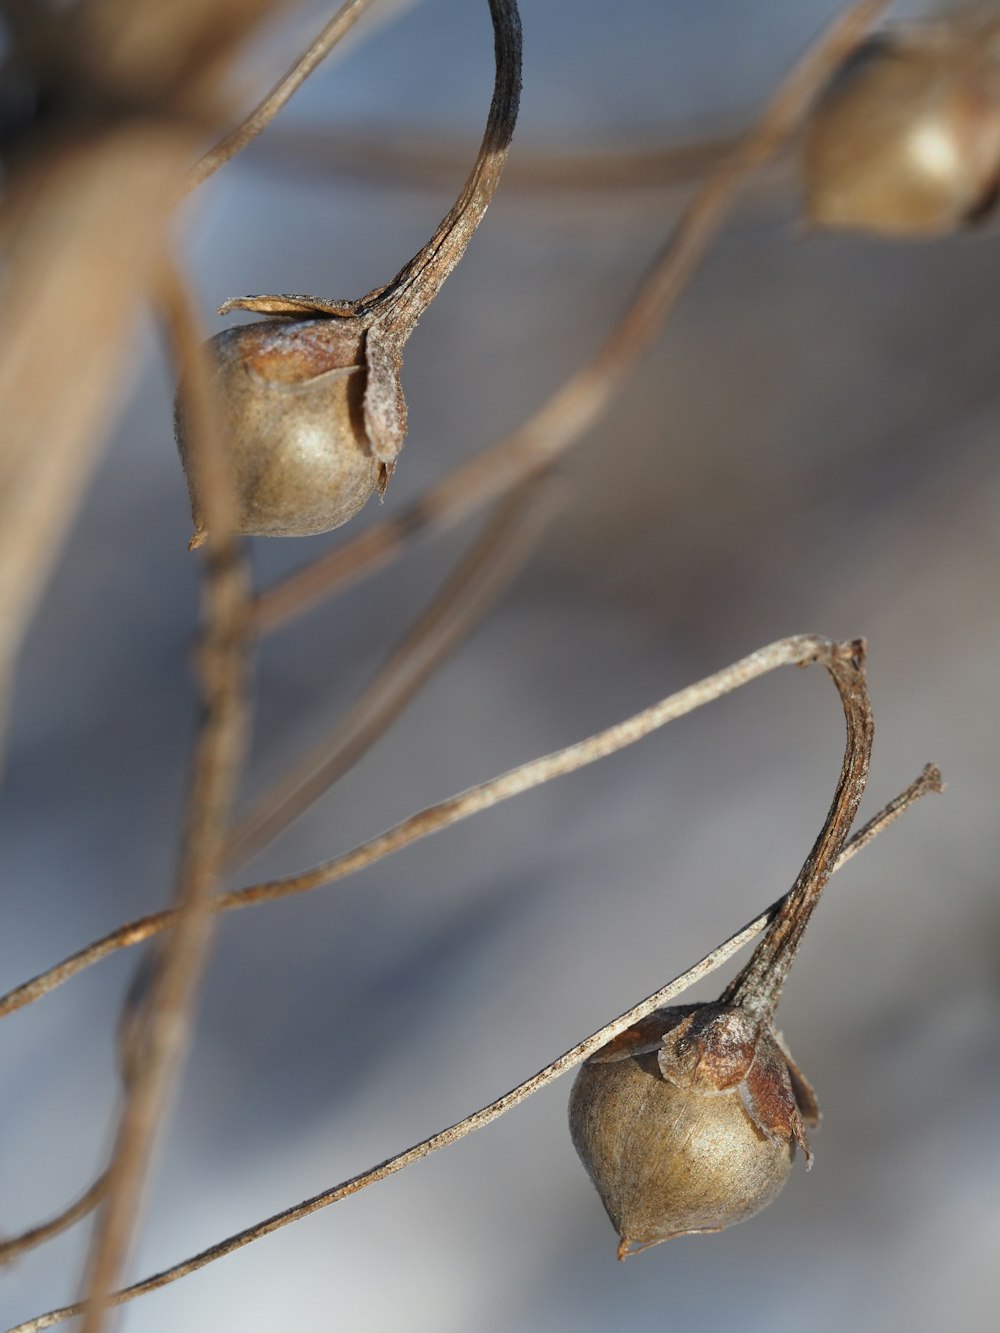 a close up of a plant with no leaves